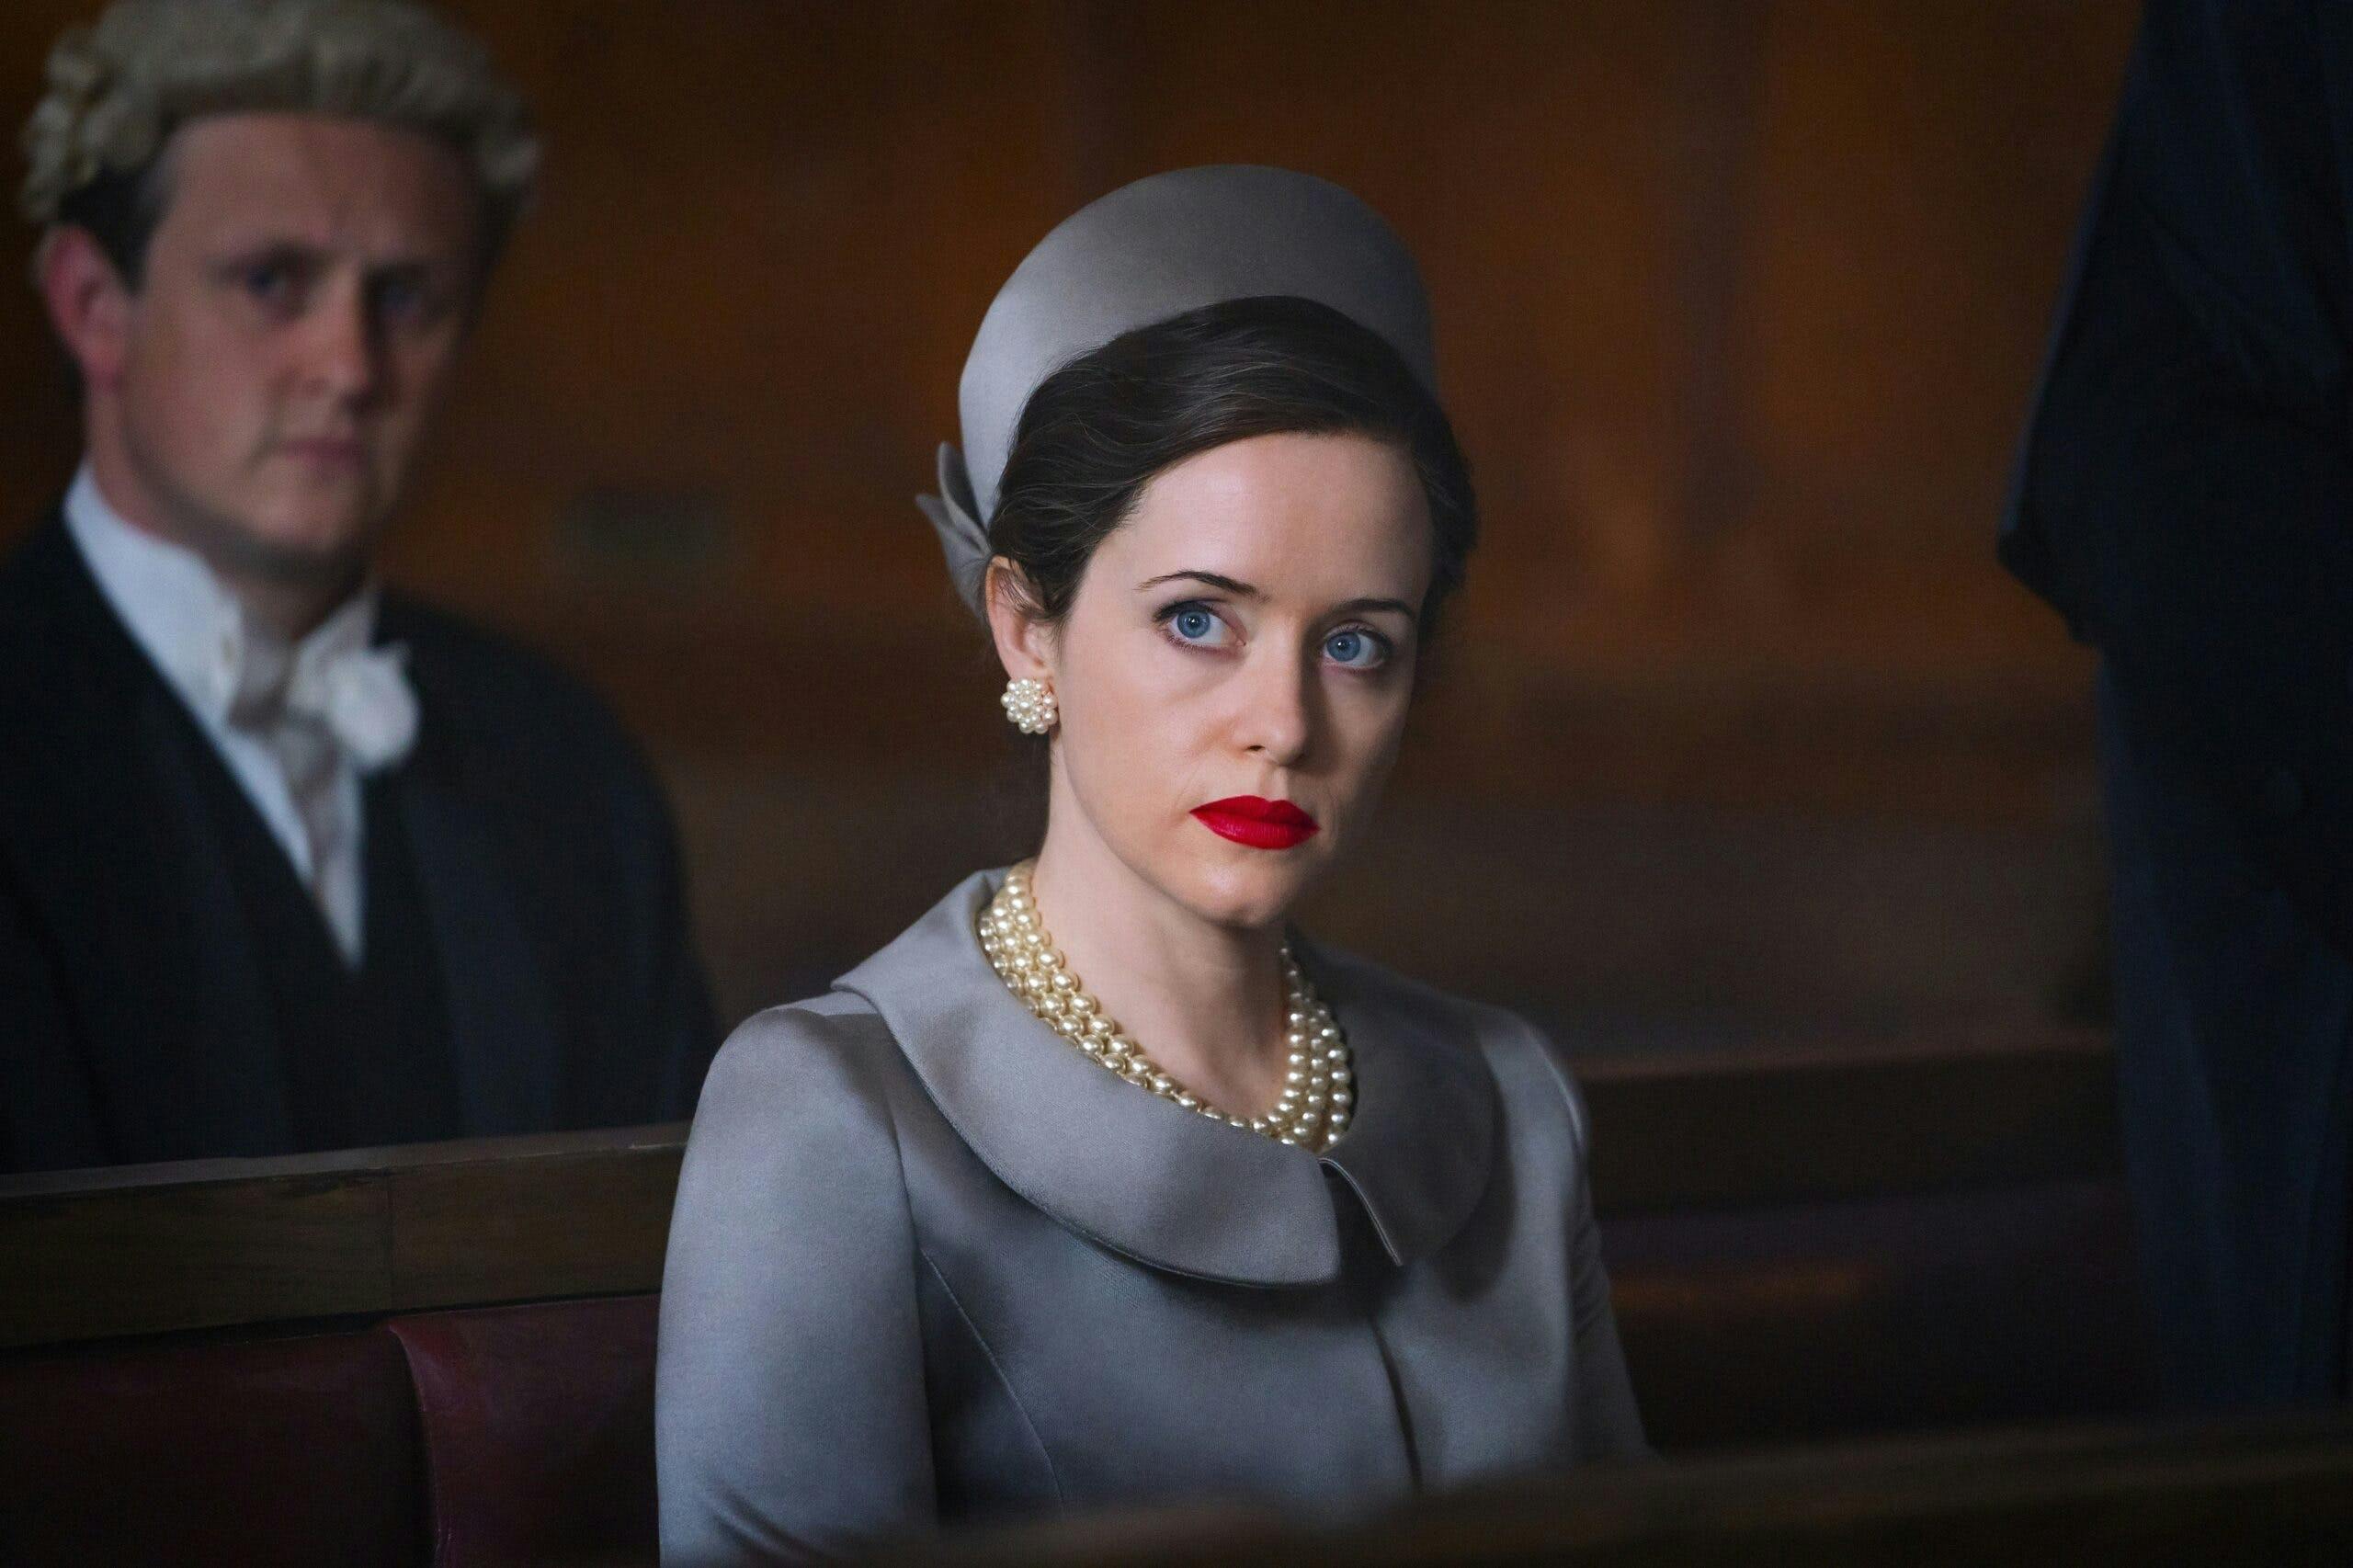 Claire Foy © Sony Pictures Entertainment. All Rights Reserved